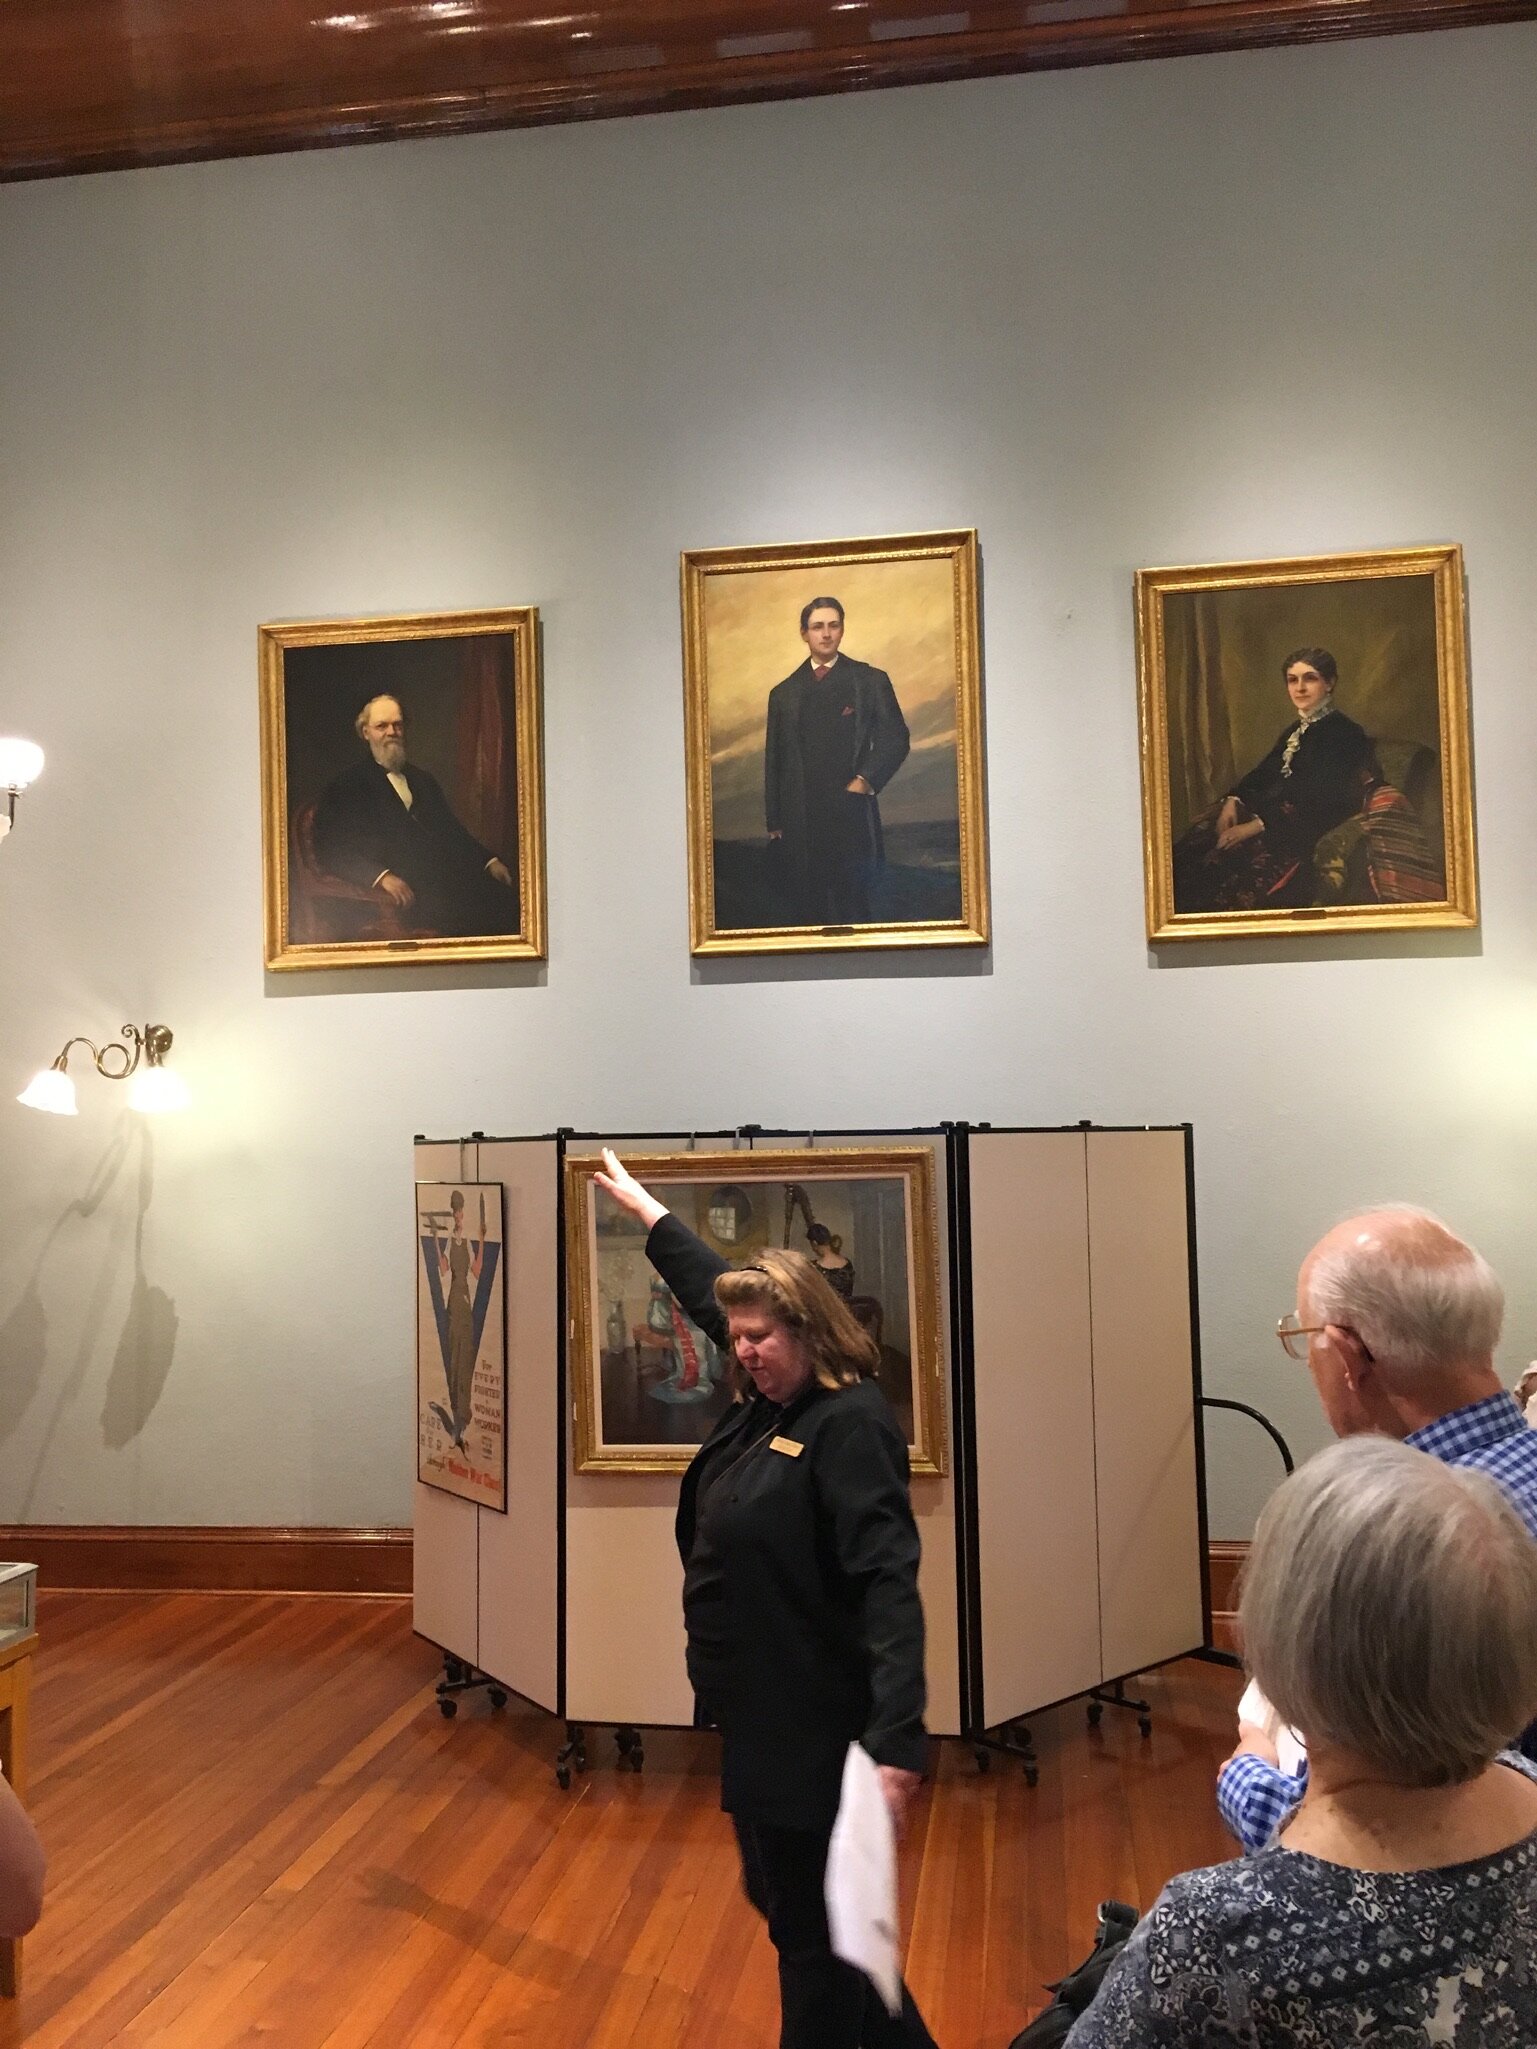 Dora St. Martin, Director and Curator, Malden Public LIbrary and Converse Memorial Building, gives a tour of the Art Galleries.